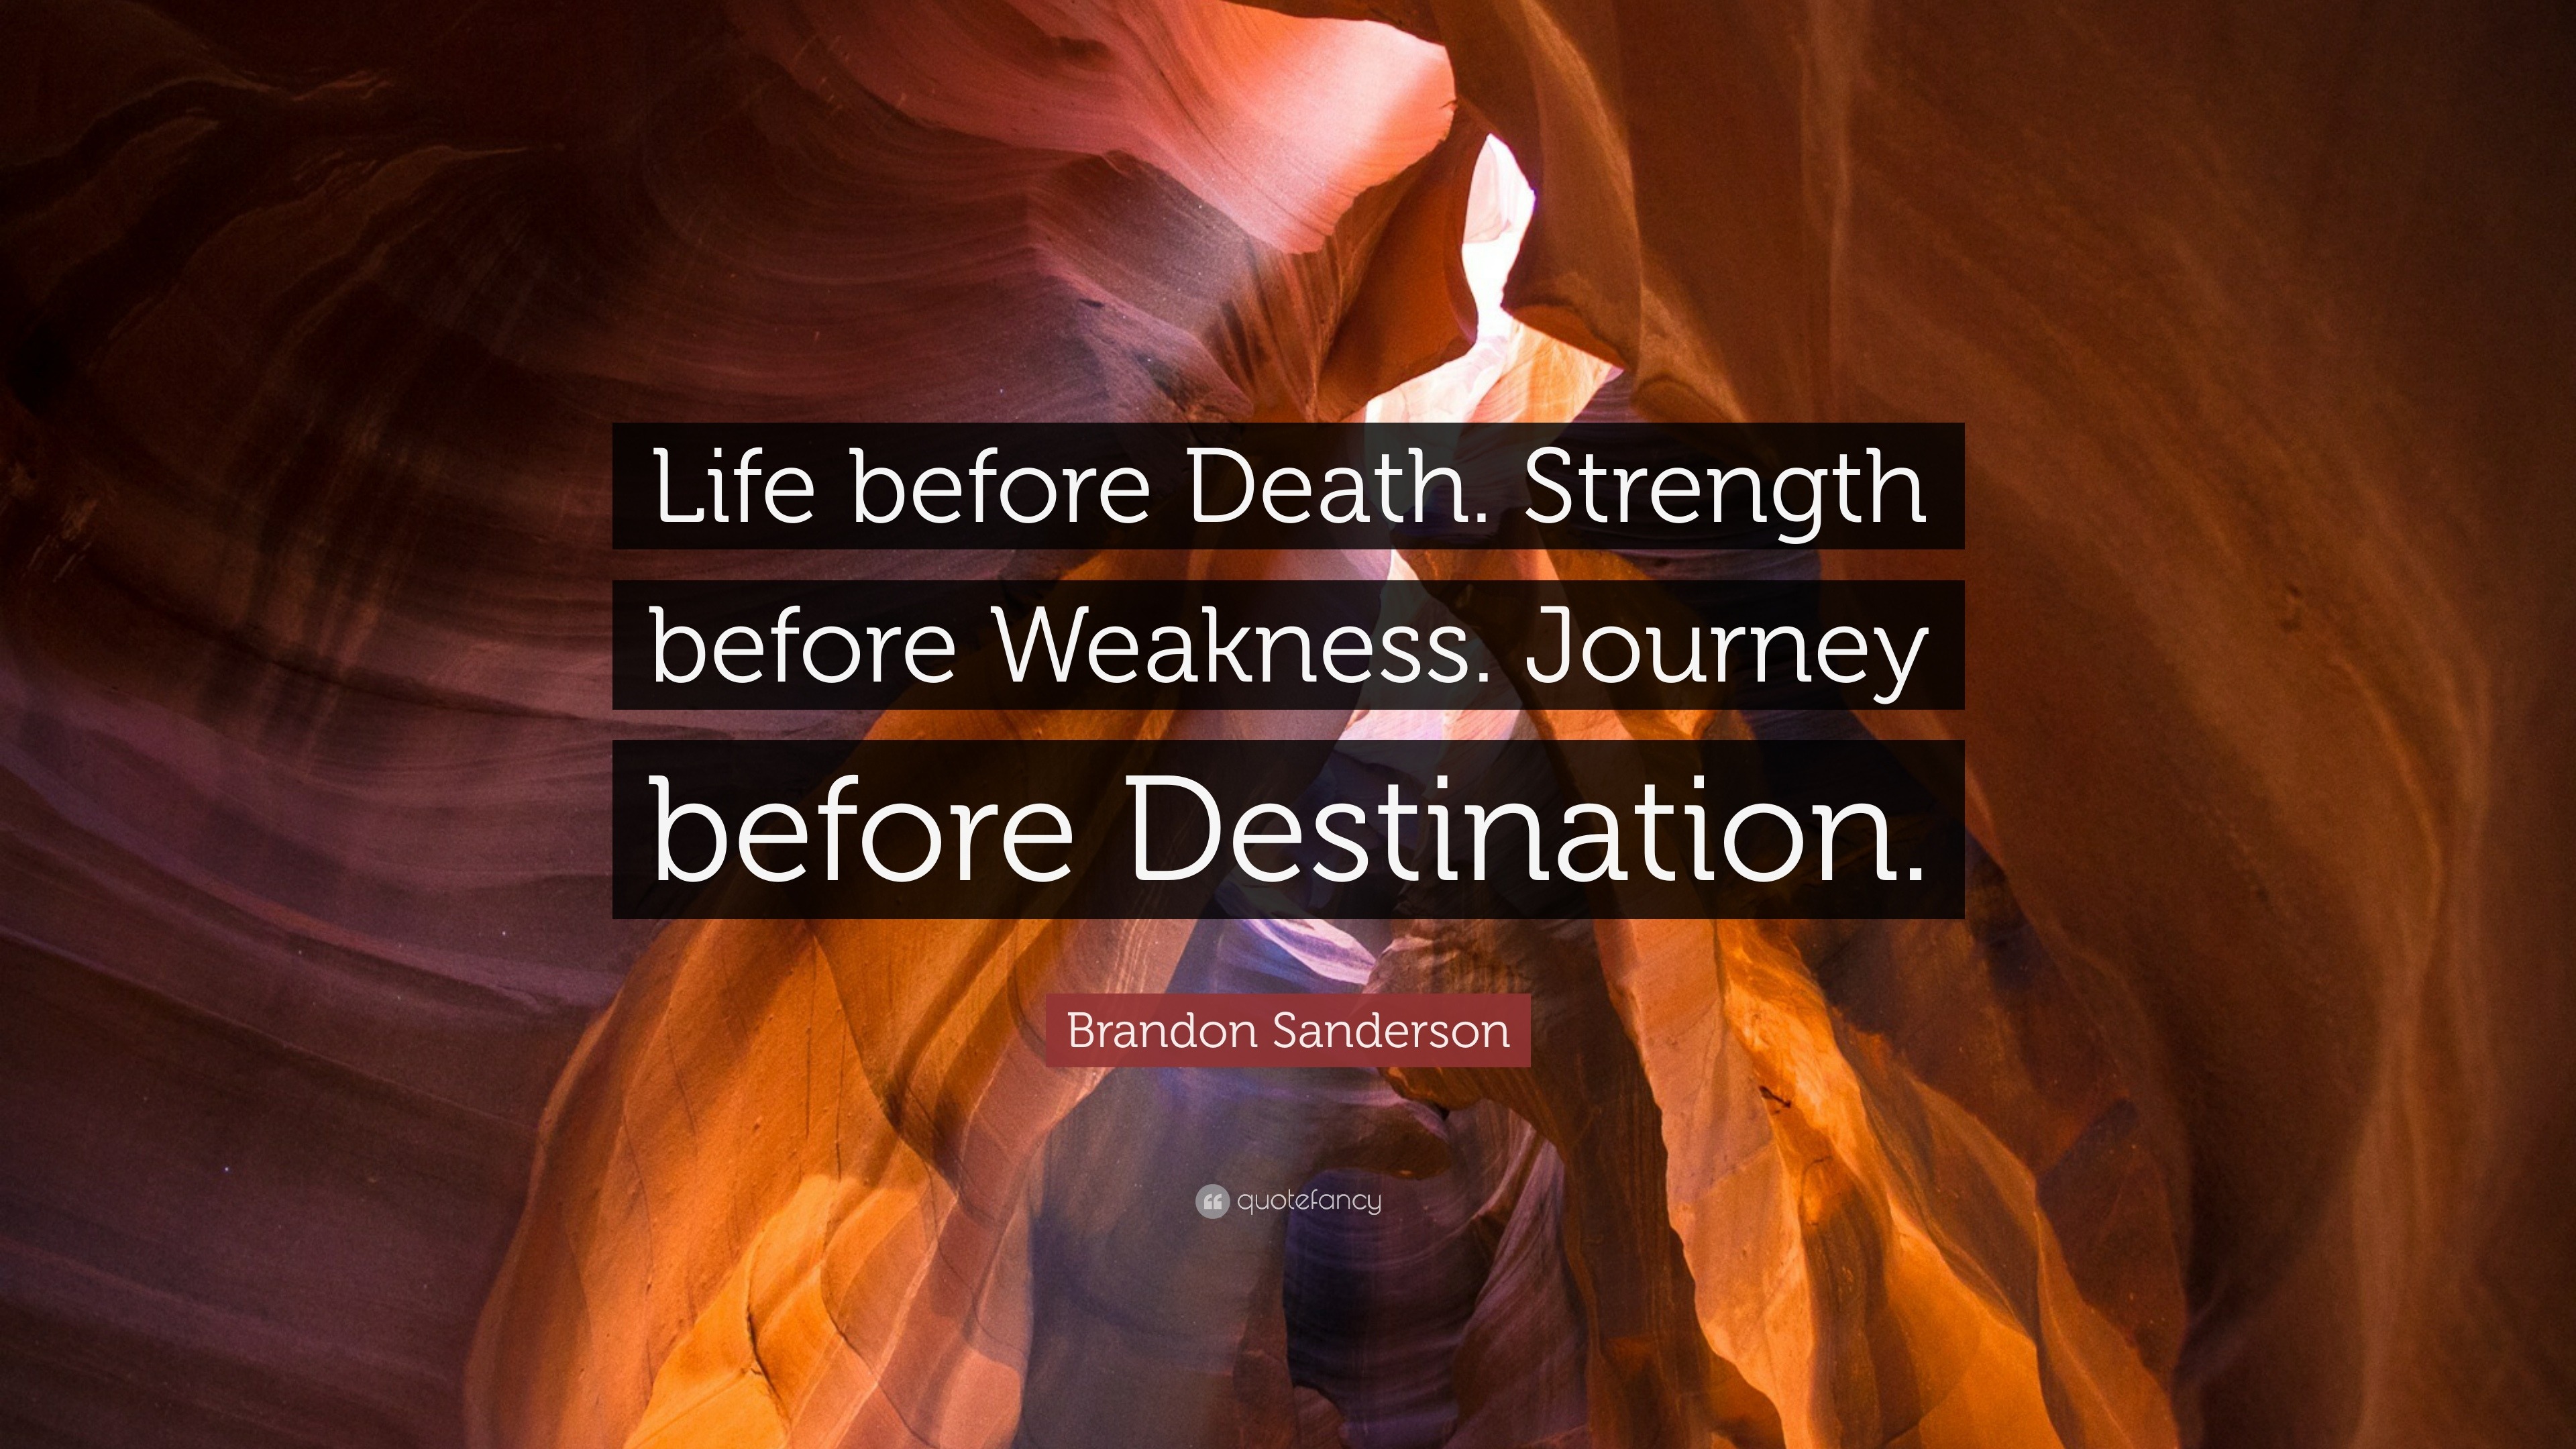 Brandon Sanderson Quote “Life before Death Strength before Weakness Journey before Destination